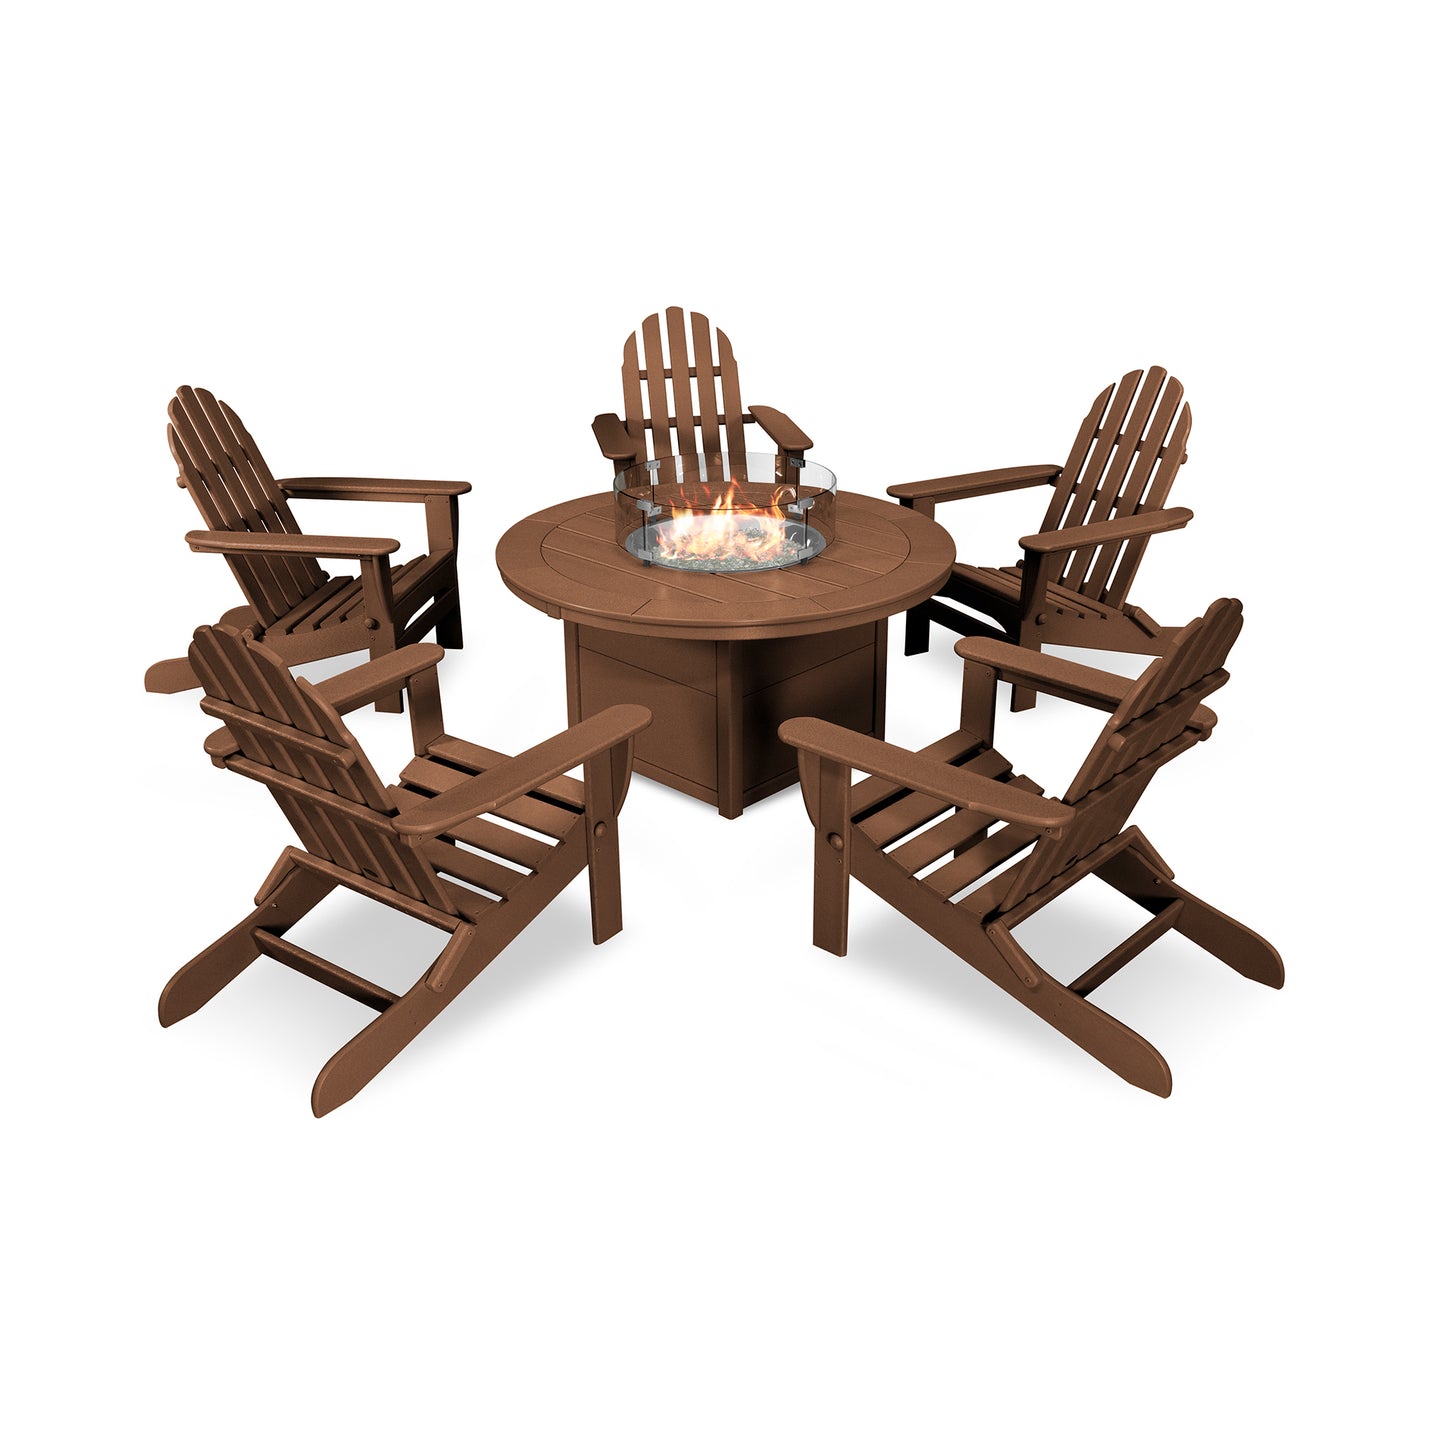 A set of four wooden POLYWOOD Classic Folding Adirondack chairs arranged around a circular fire pit table, all set on a plain white background.